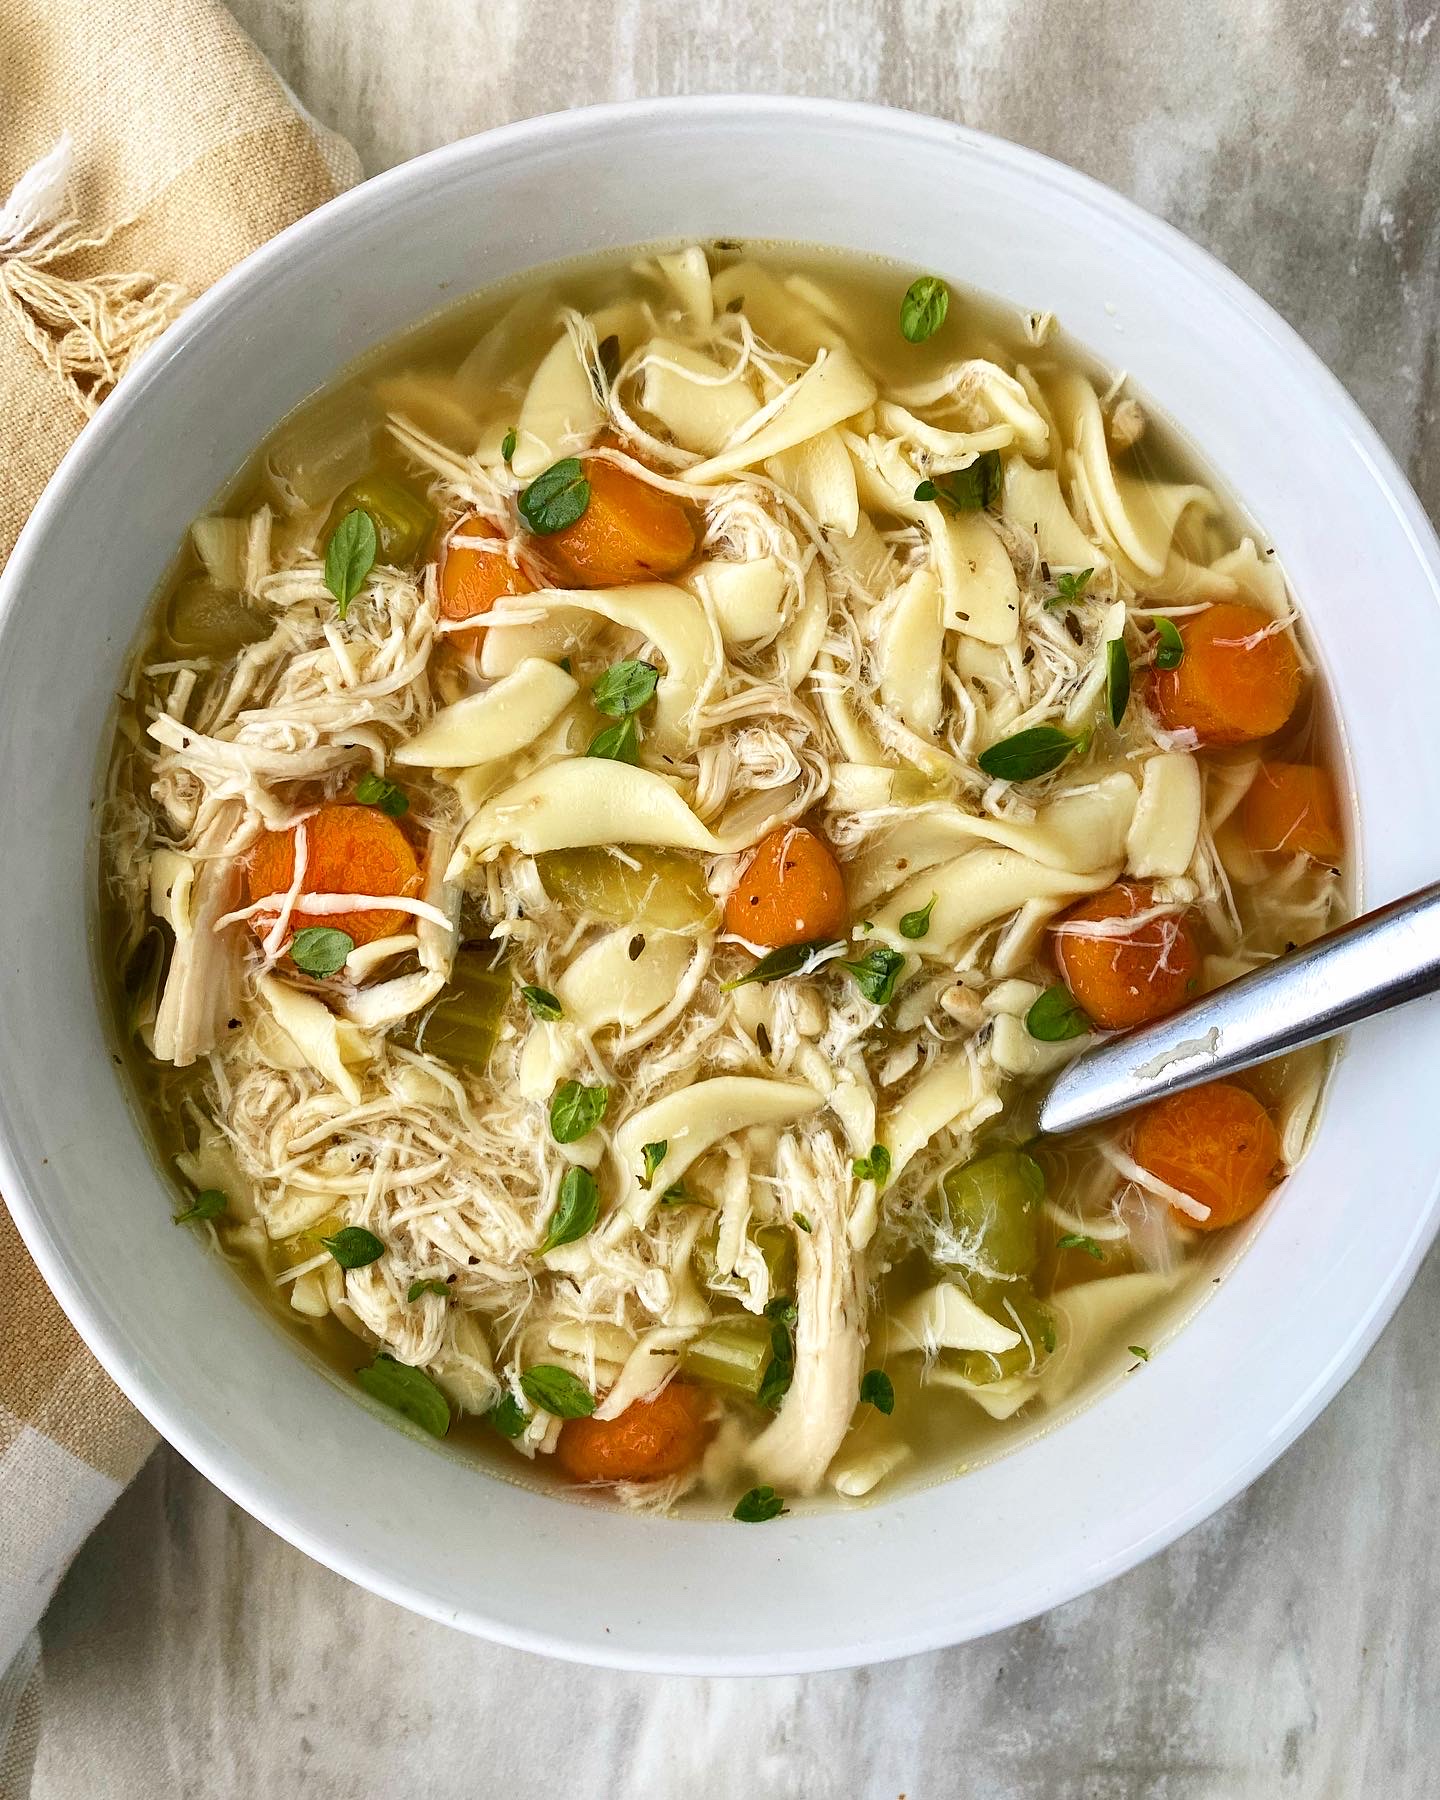 The Most Flavorful Homemade Chicken Noodle Soup - Fit Foodie Finds